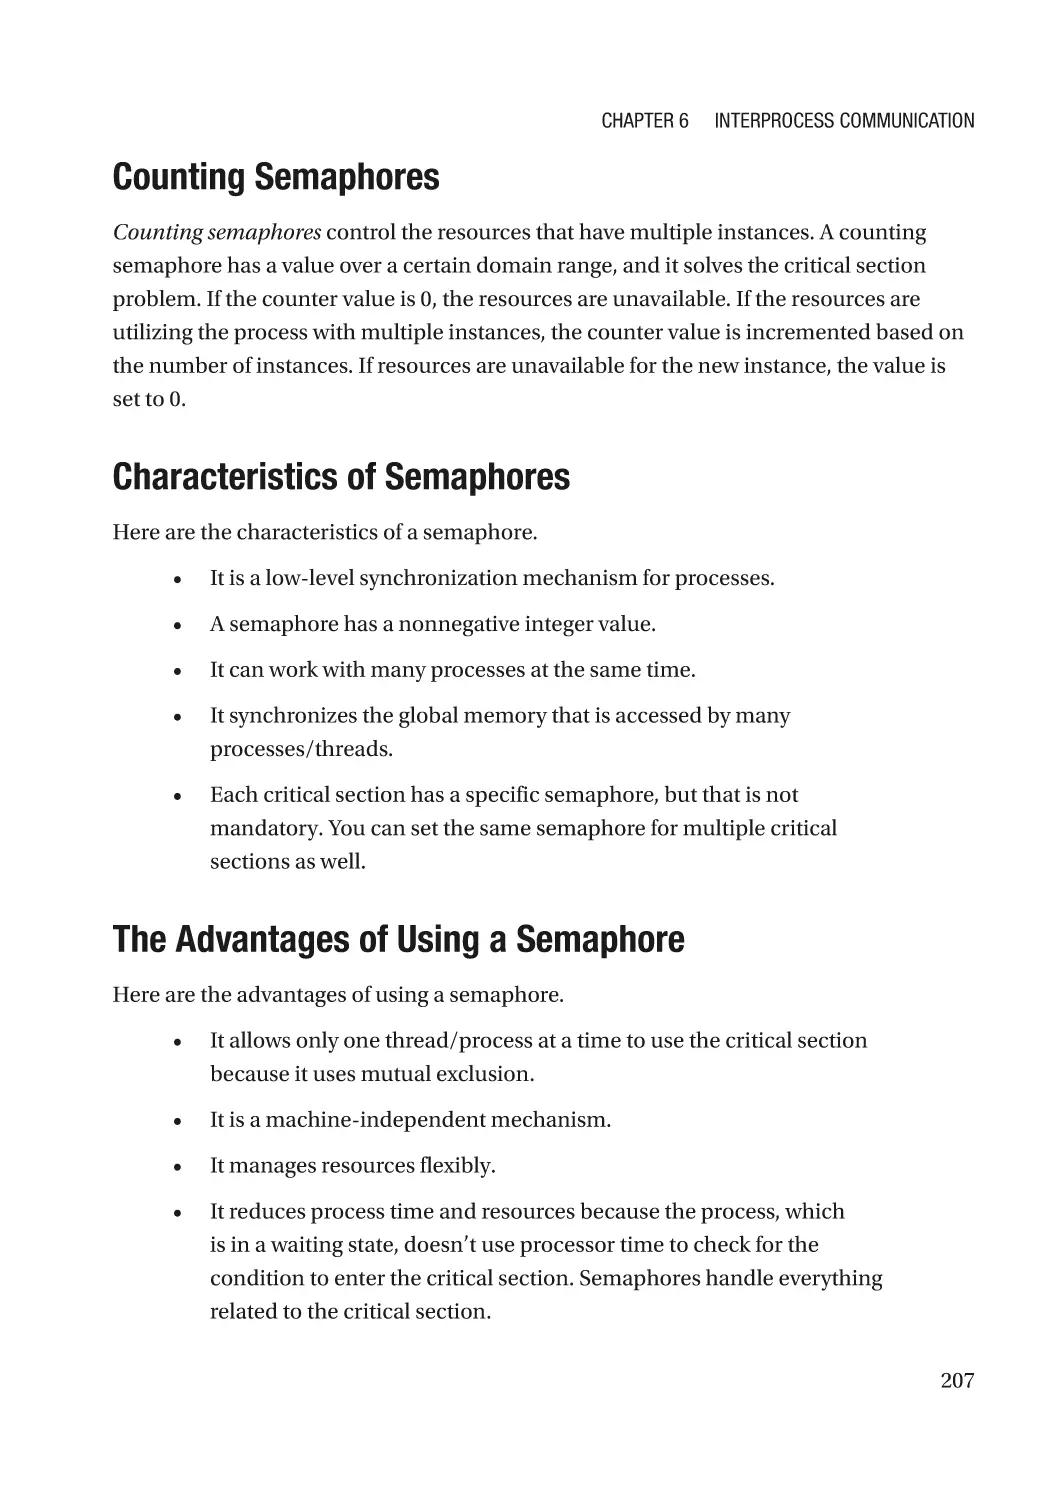 Counting Semaphores
Characteristics of Semaphores
The Advantages of Using a Semaphore